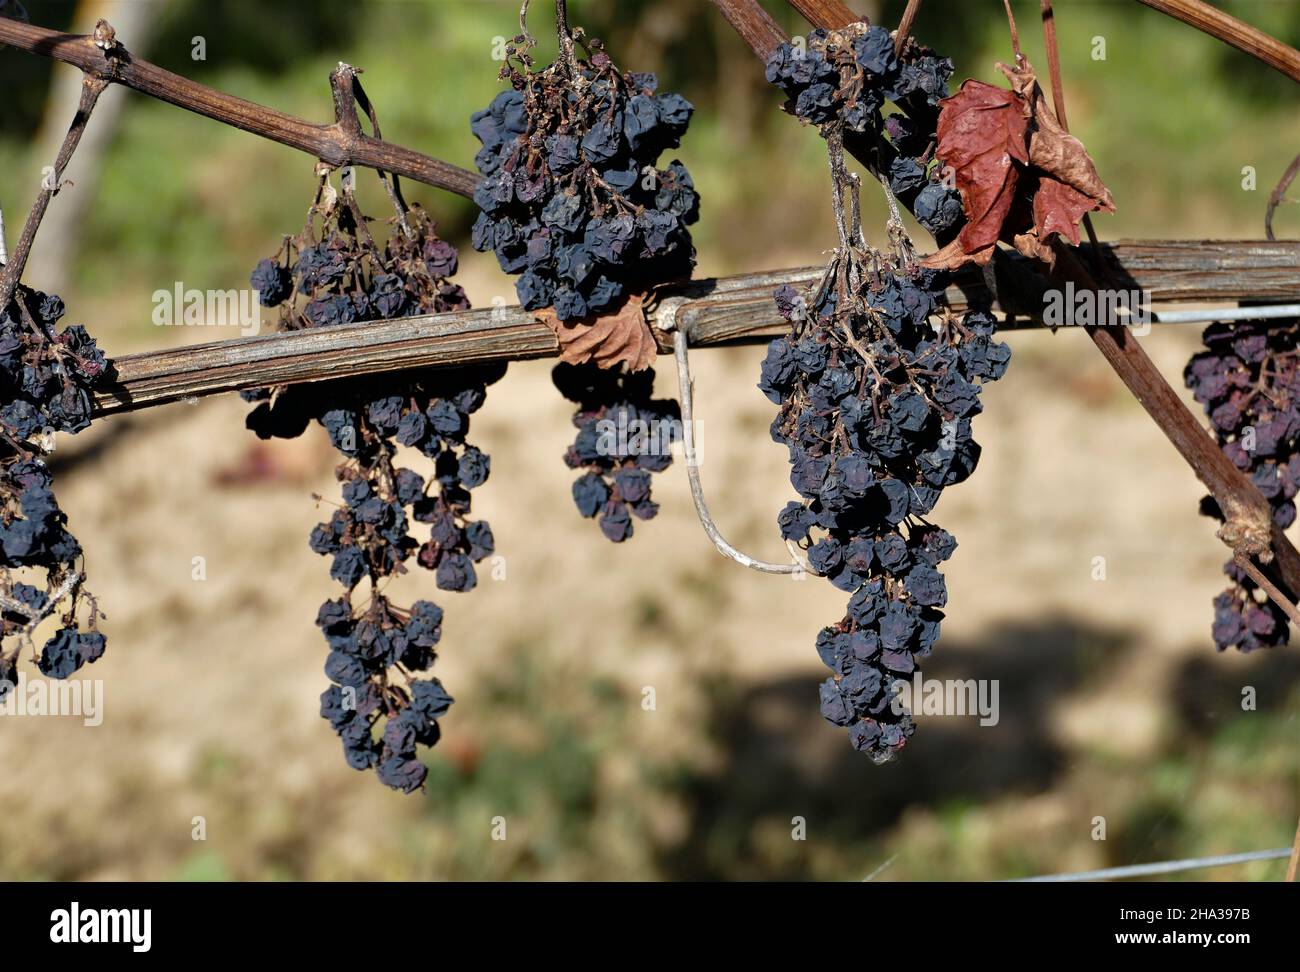 Dried Up Blue Grapes On The Vine Stock Photo